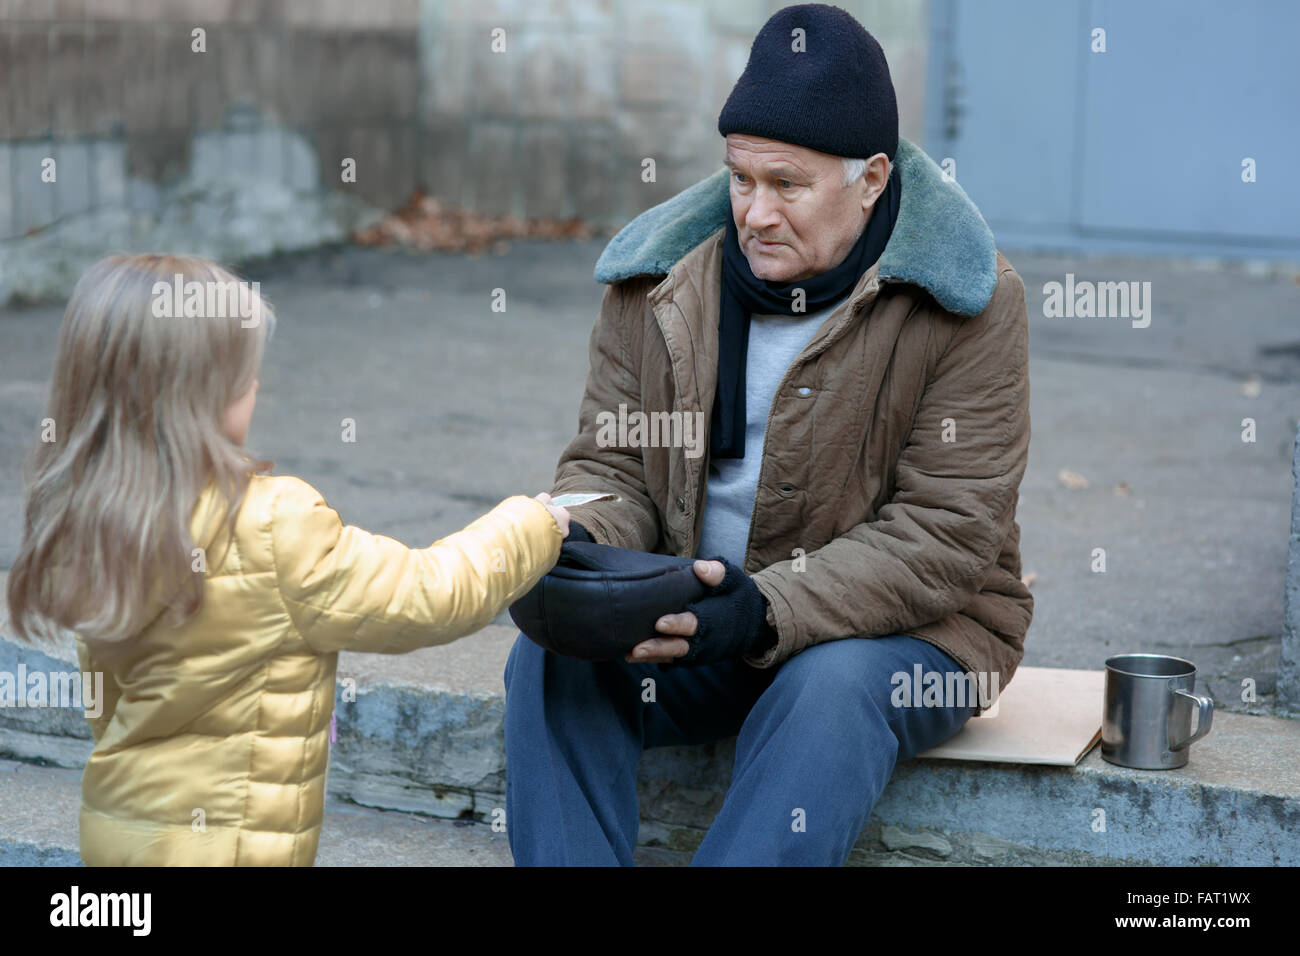 Little girl gives money to the beggar. Stock Photo